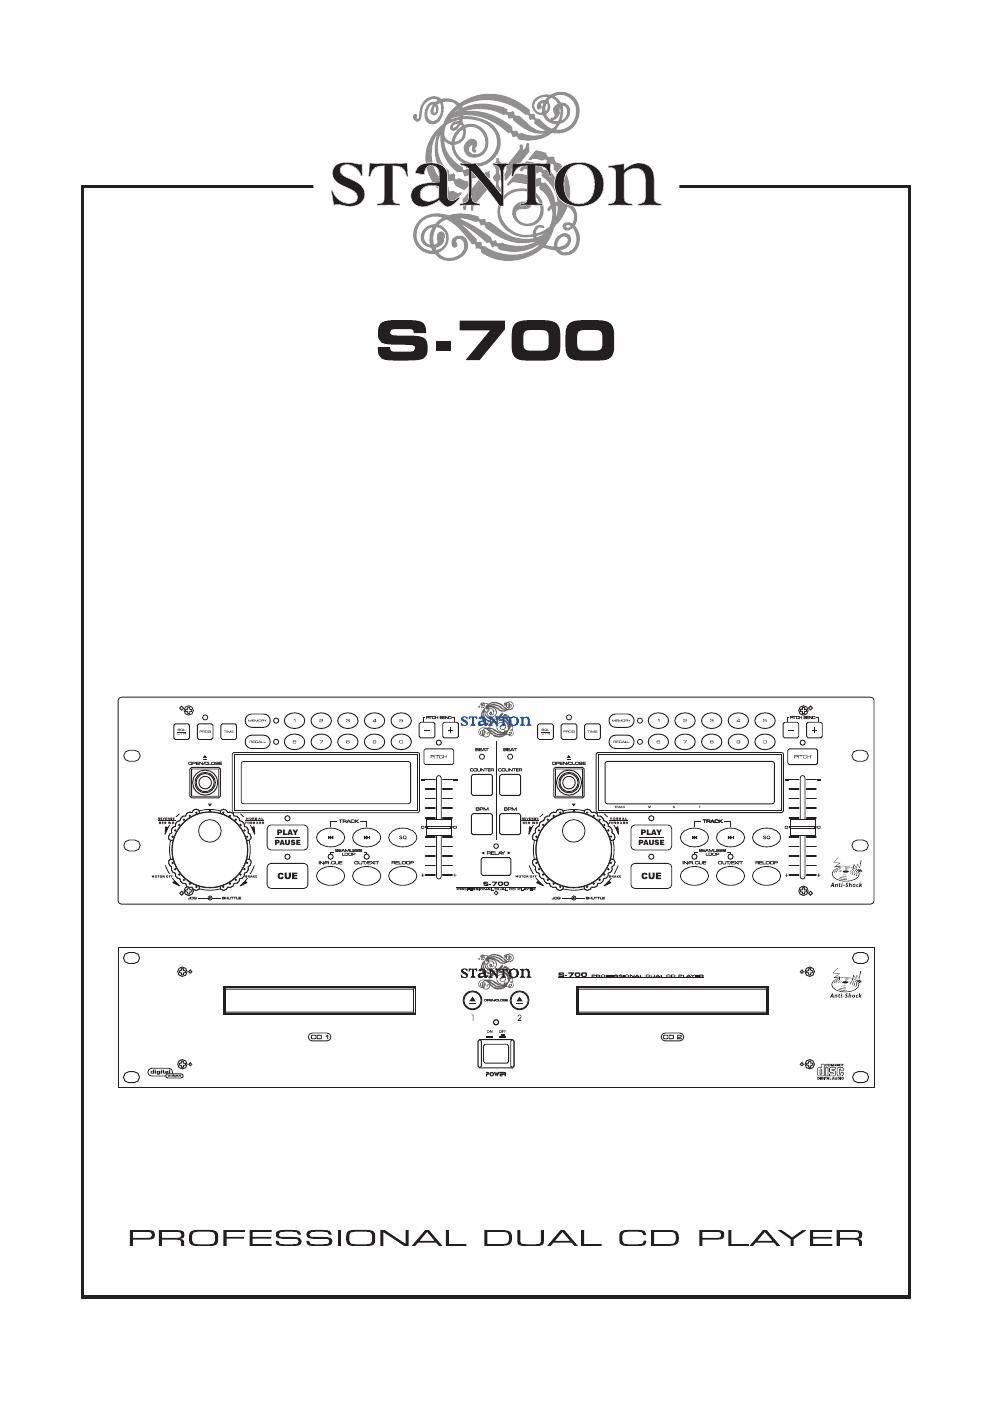 stanton s 700 owners manual